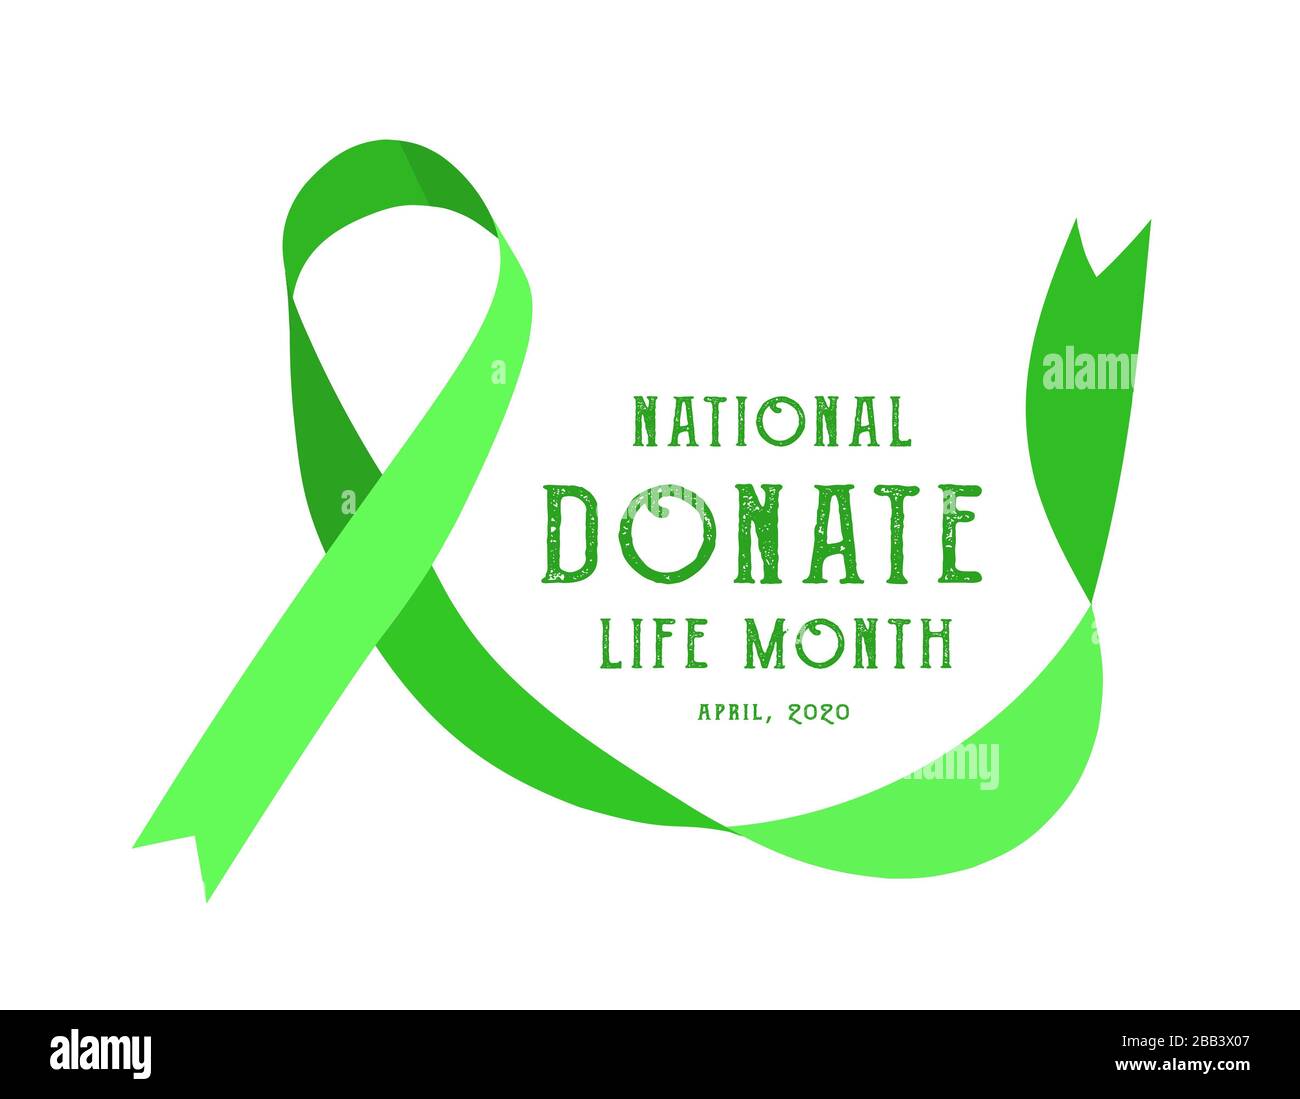 National donate life month. Vector illustration with green ribbon on light background. Stock Photo